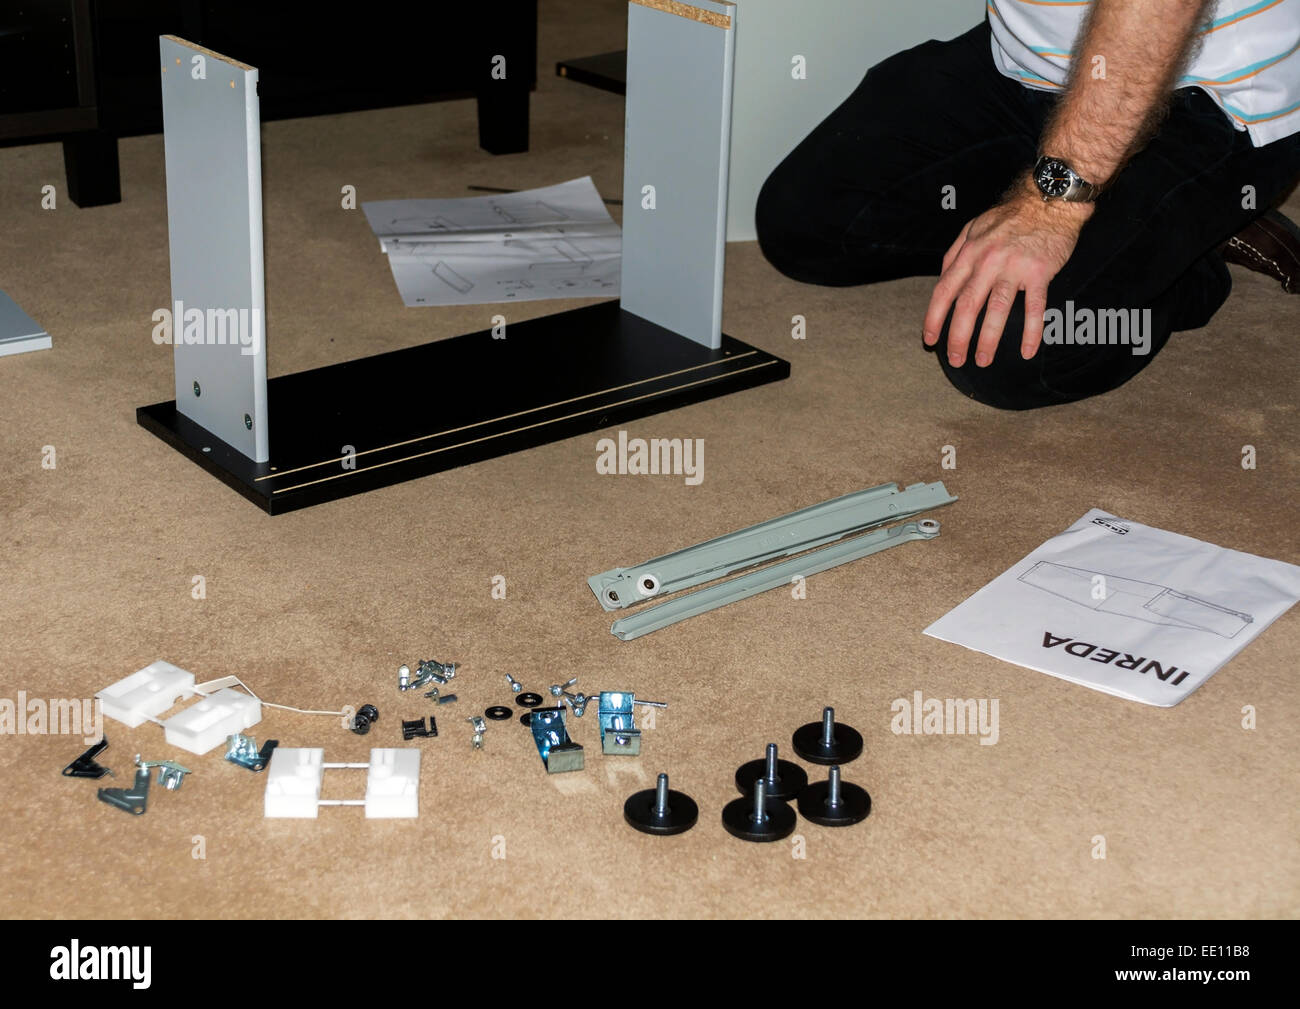 This man is assembling flat-packed furniture. Stock Photo